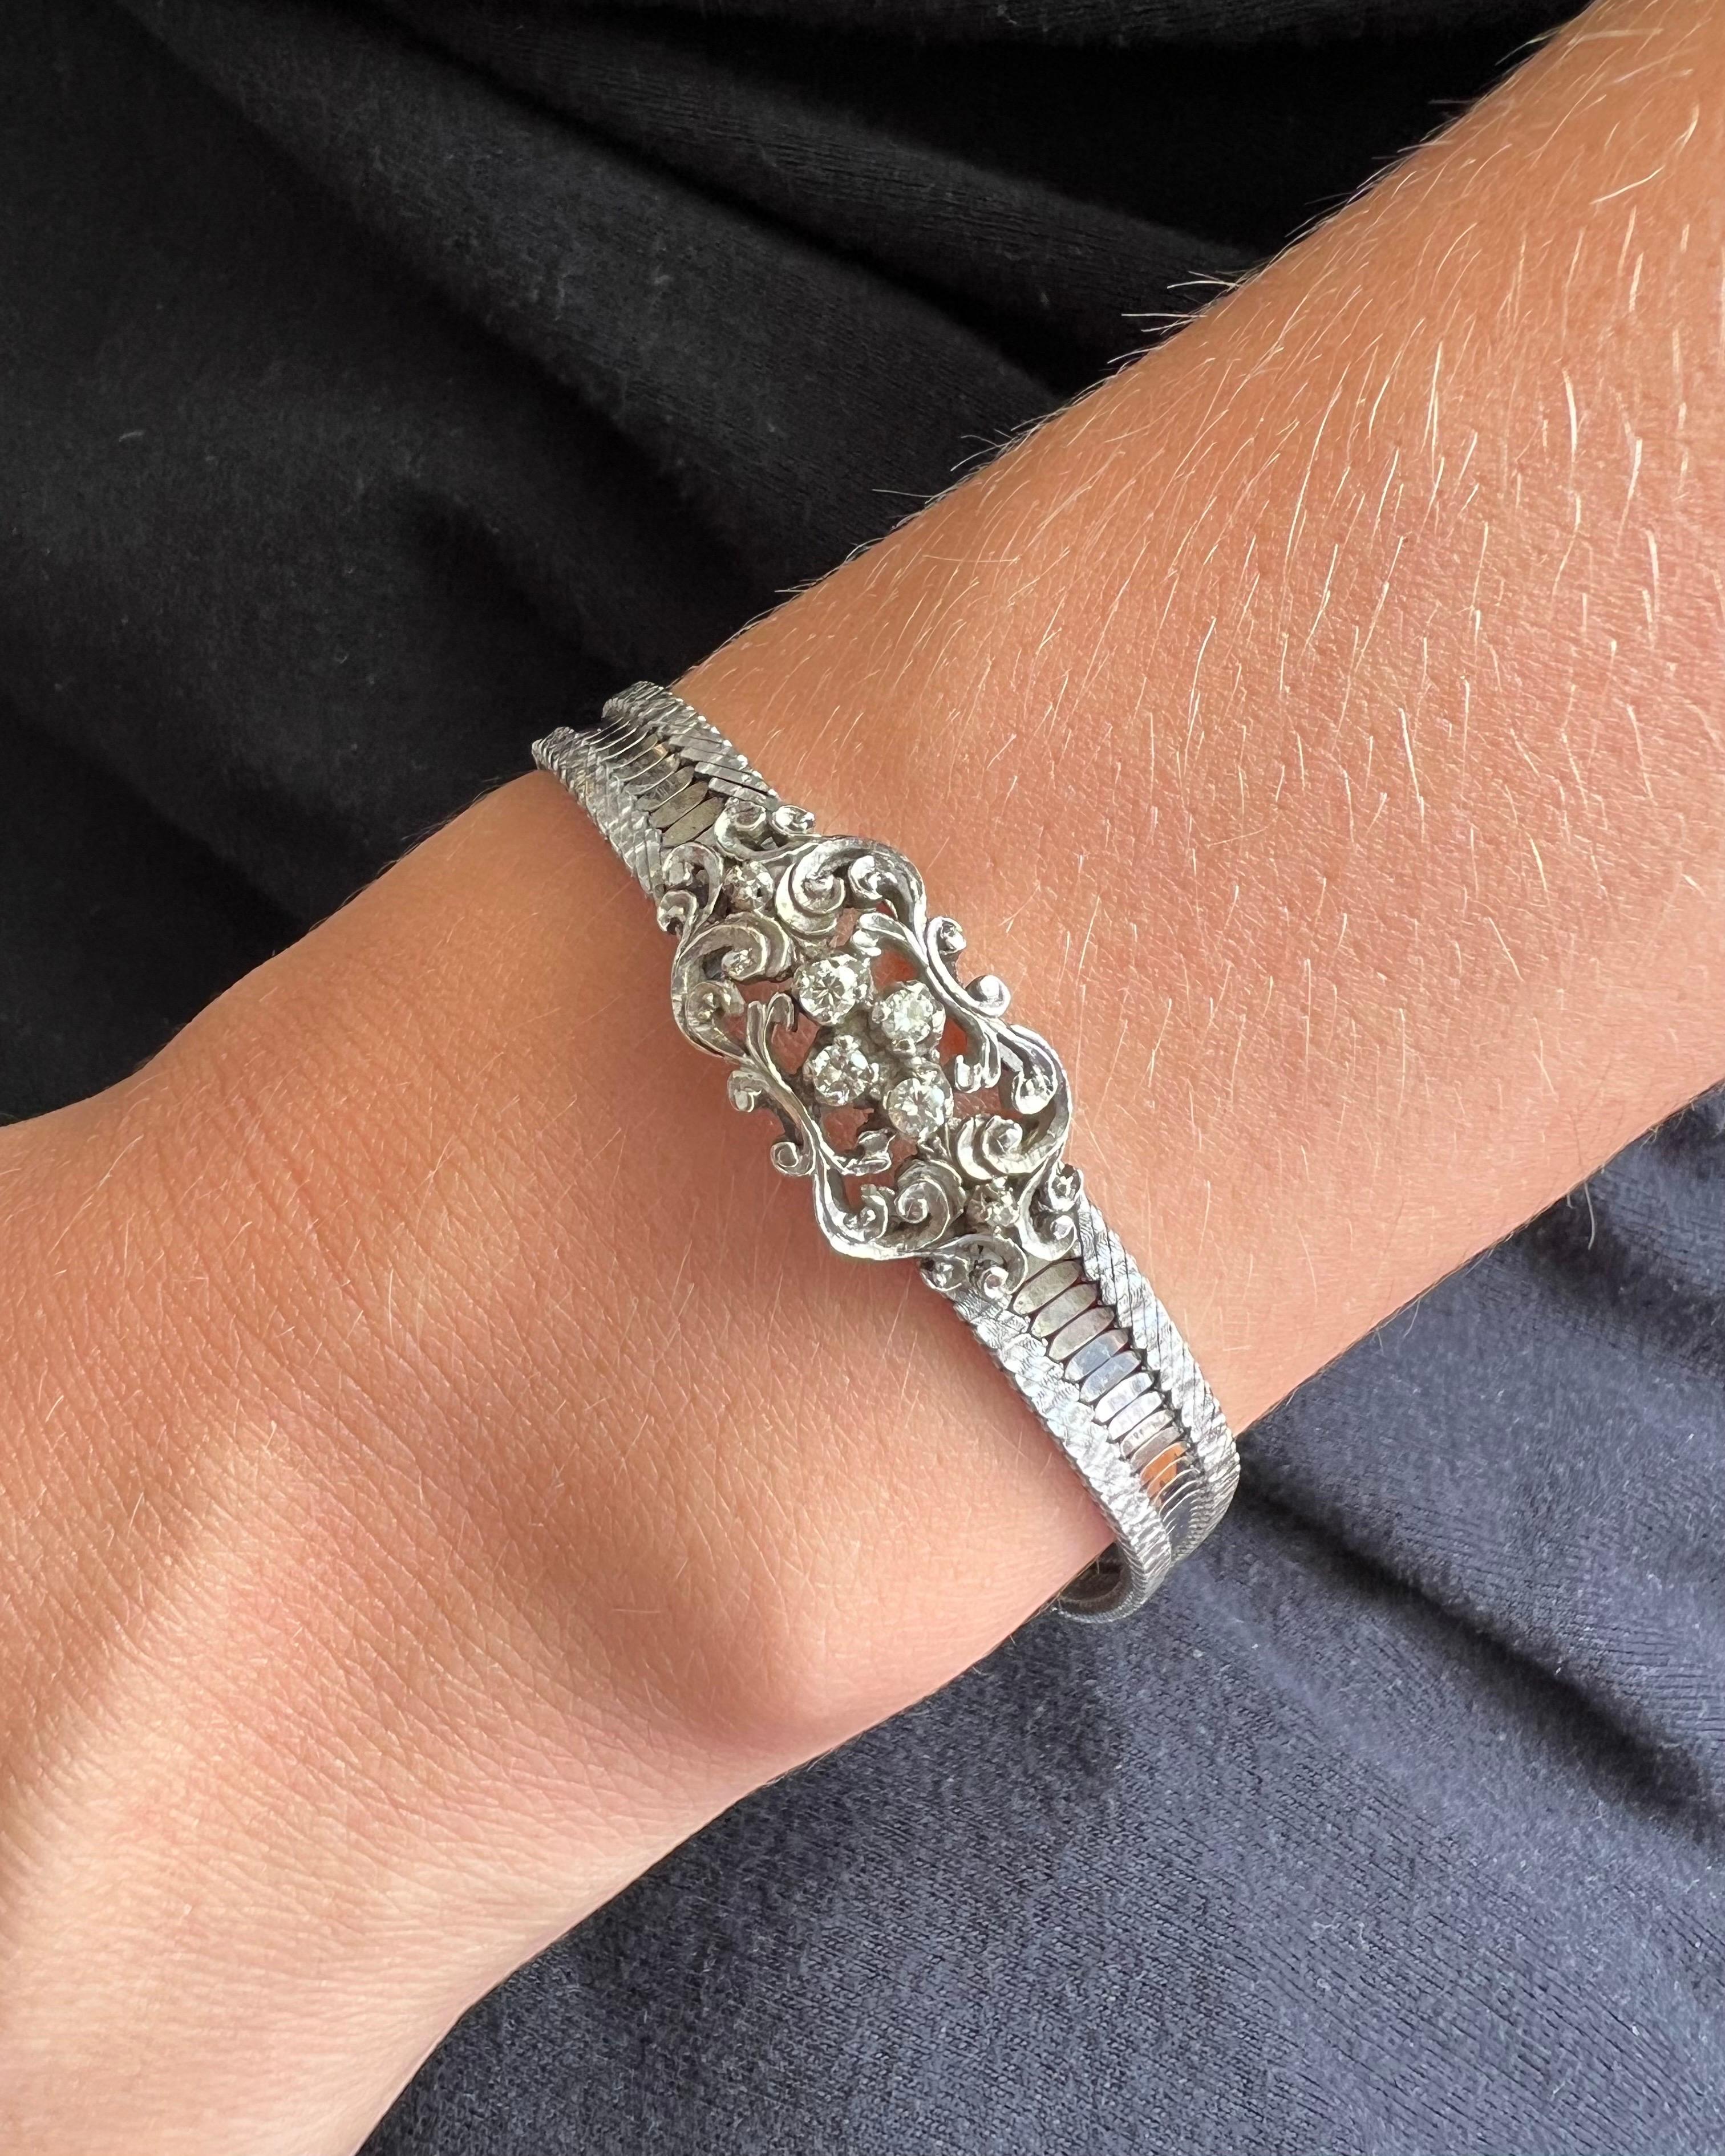 This is an antique Edwardian brilliant cut diamond snake chain bracelet. The beautiful bracelet consist of brilliant cut diamonds, set in a floral white gold frame. This white gold bracelet is created with a chased frame in the center set with four